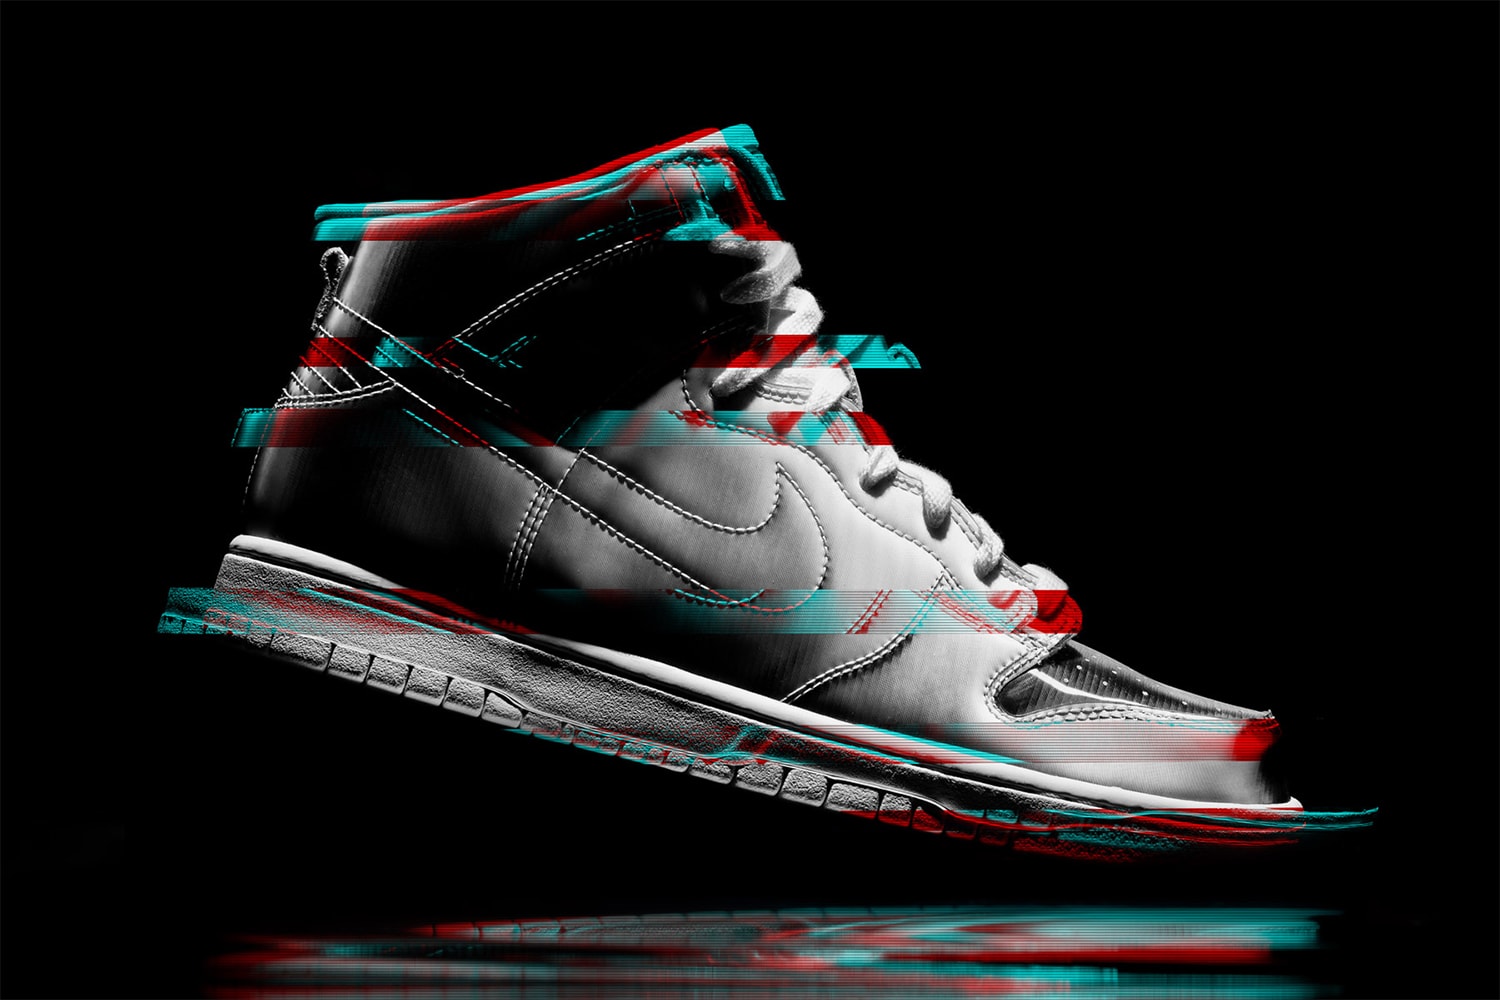 CLOT Nike Flux Dunk Closer Look Release Info DH4444-900 High Date Buy Price Juice Edison Chen